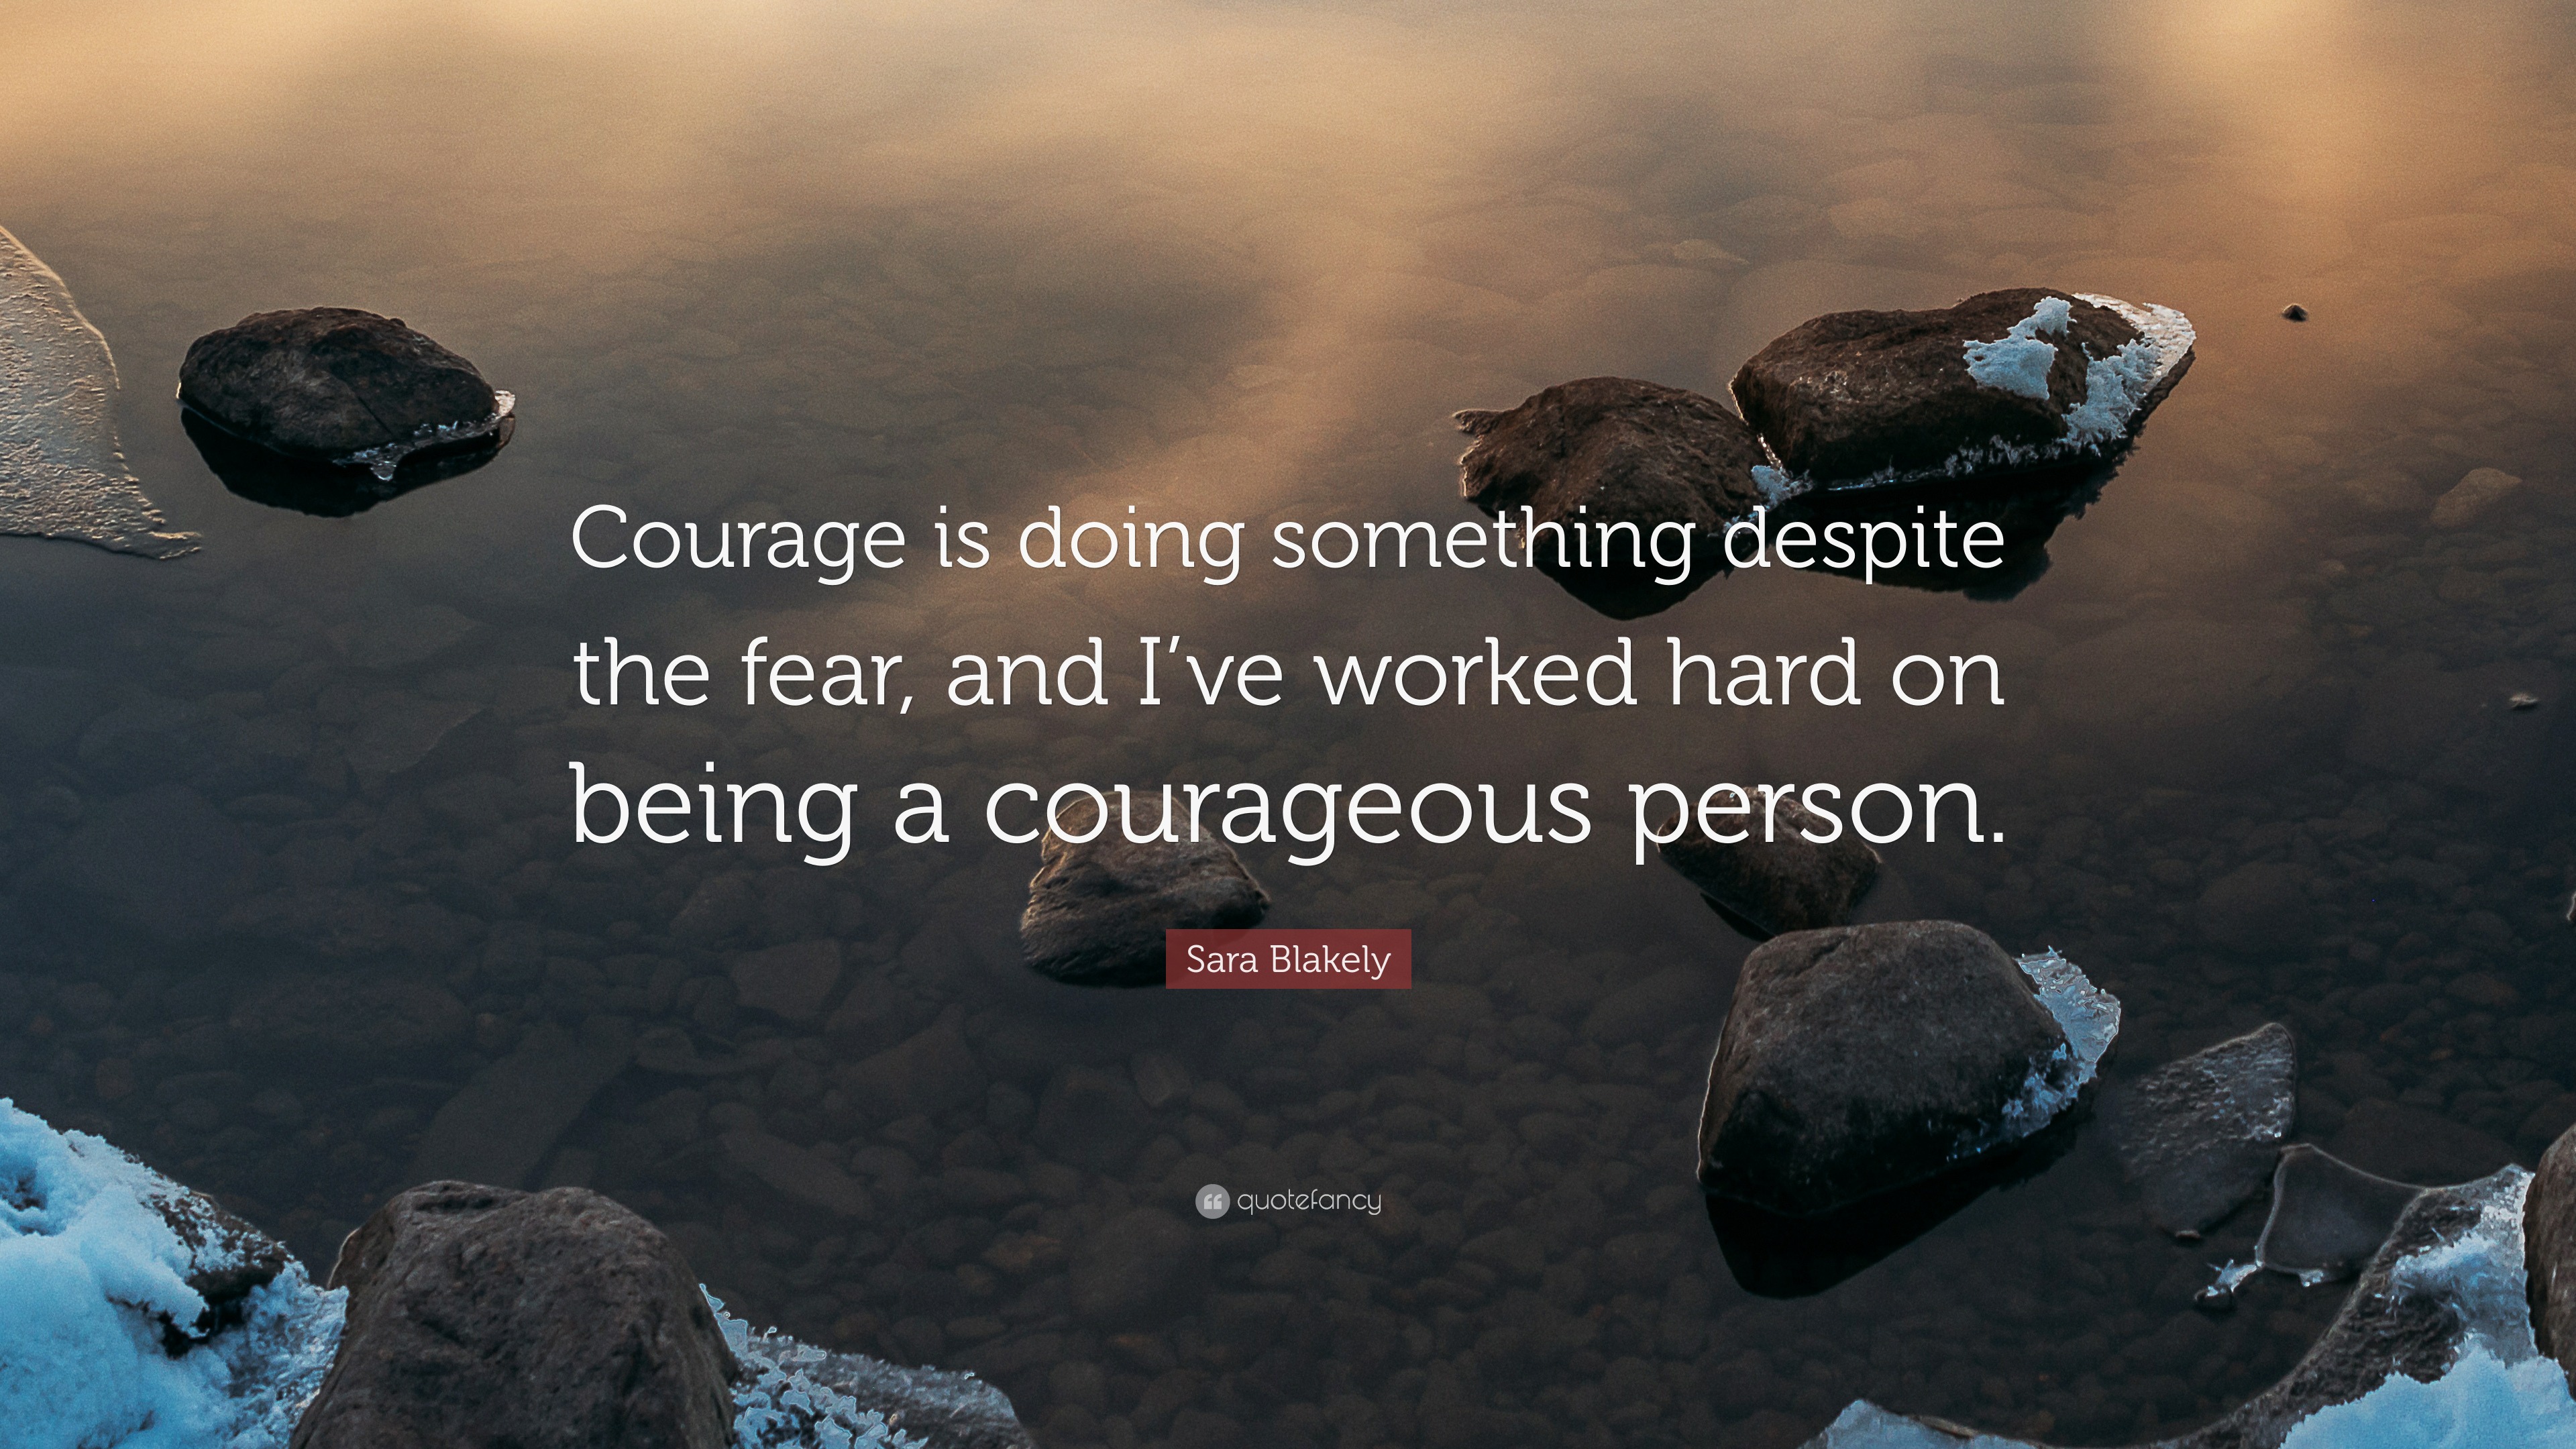 Sara Blakely Quote: “Courage is doing something despite the fear, and I ...